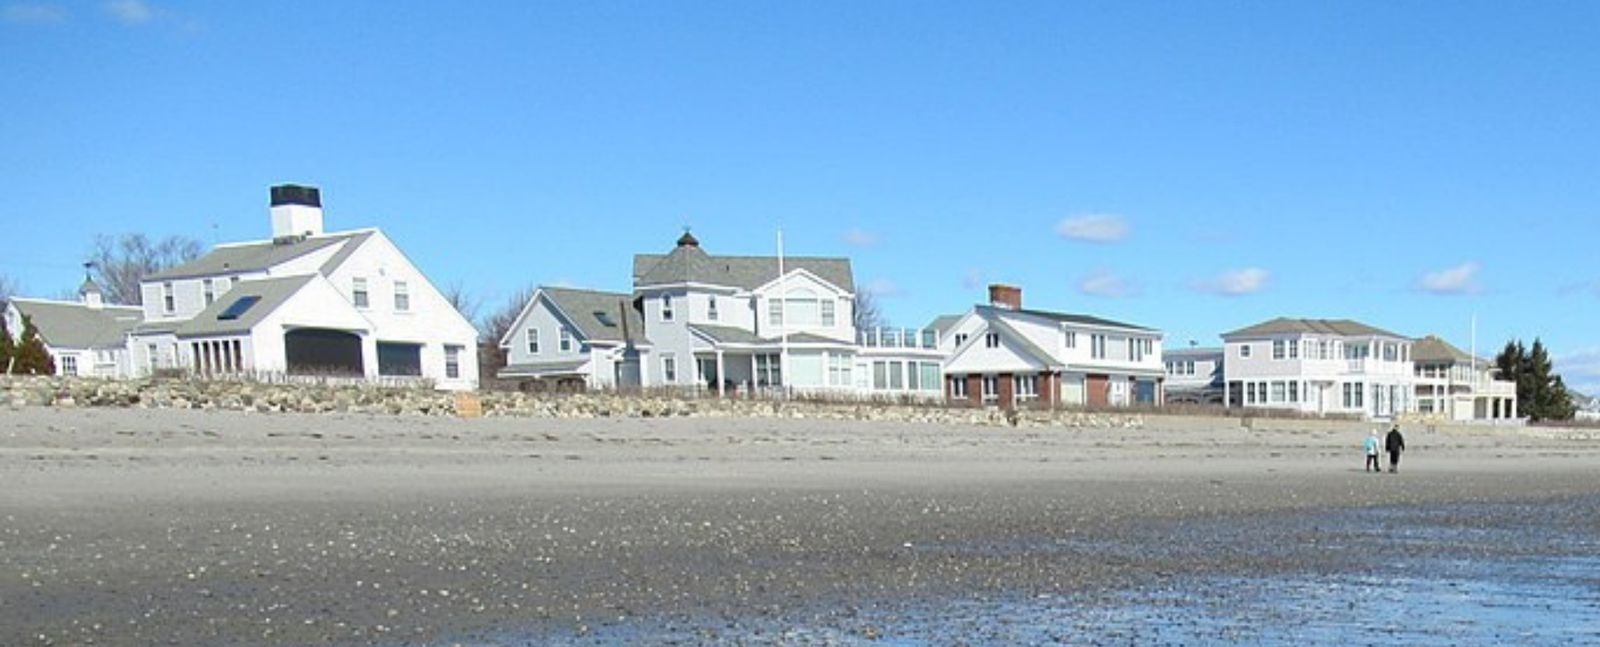 Ocean front homes in New Hampshire region